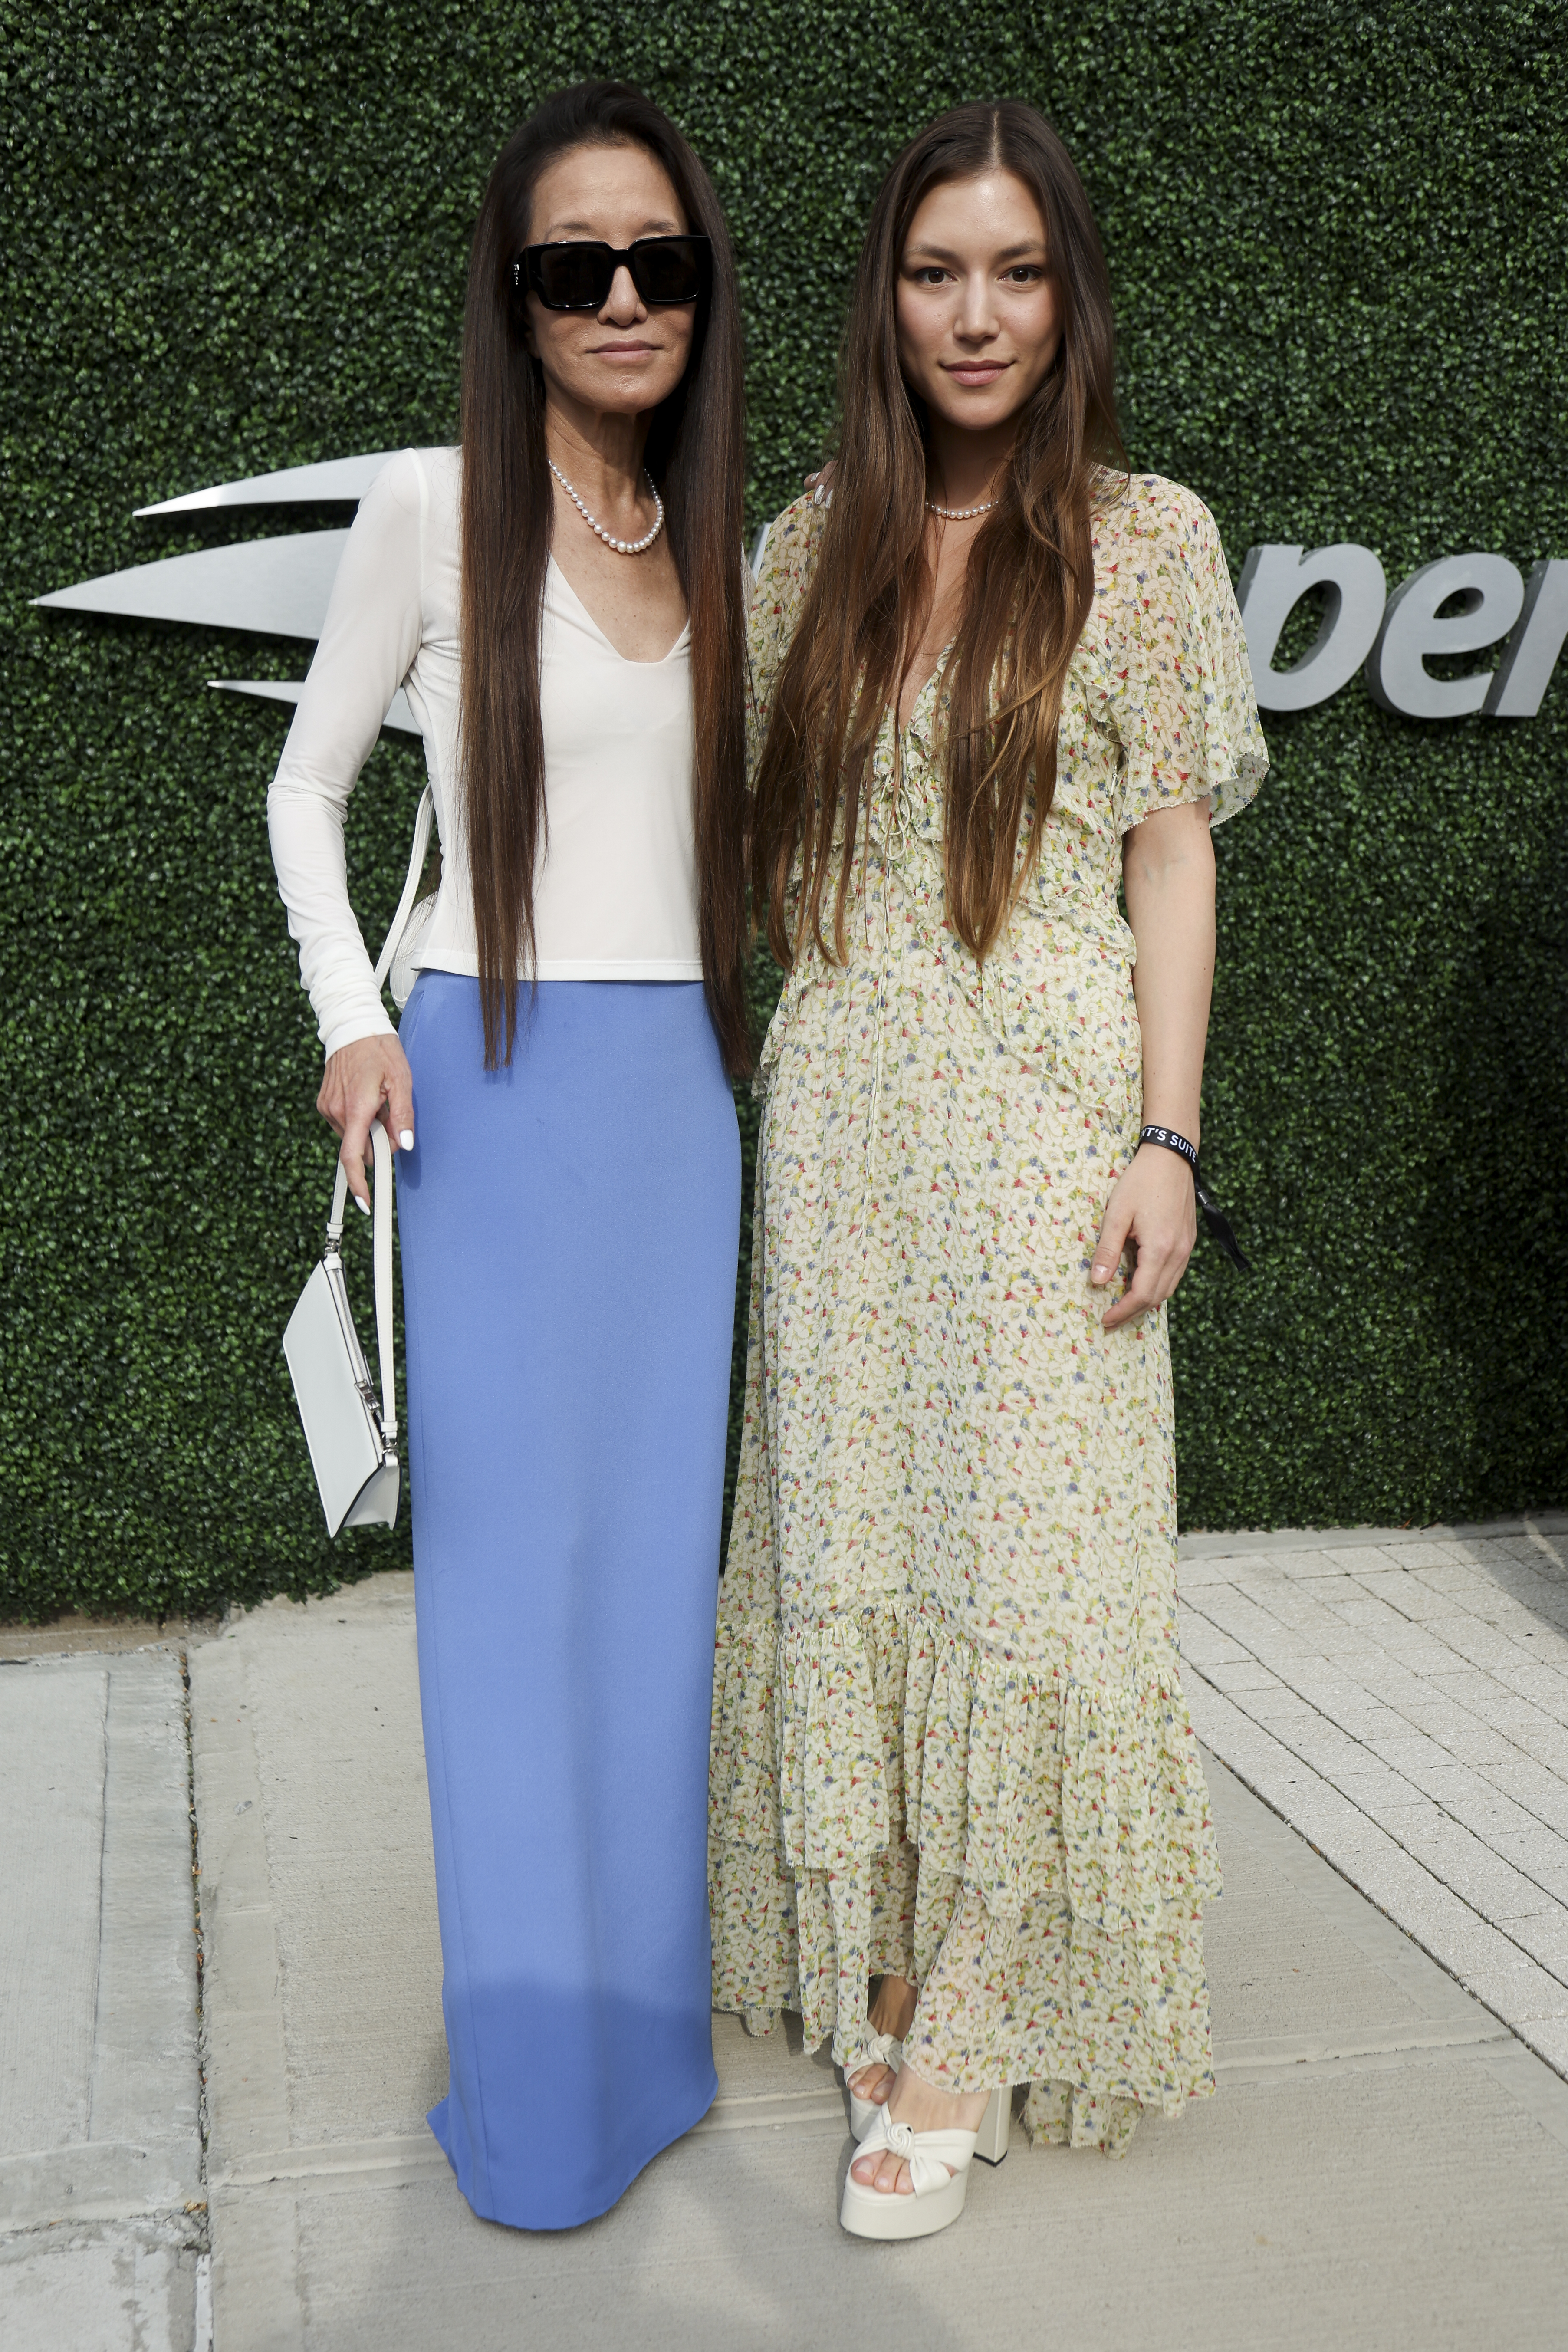 Vera Wang and Josephine Becker at the 2023 US Open in New York City on August 28, 2023 | Source: Getty Images